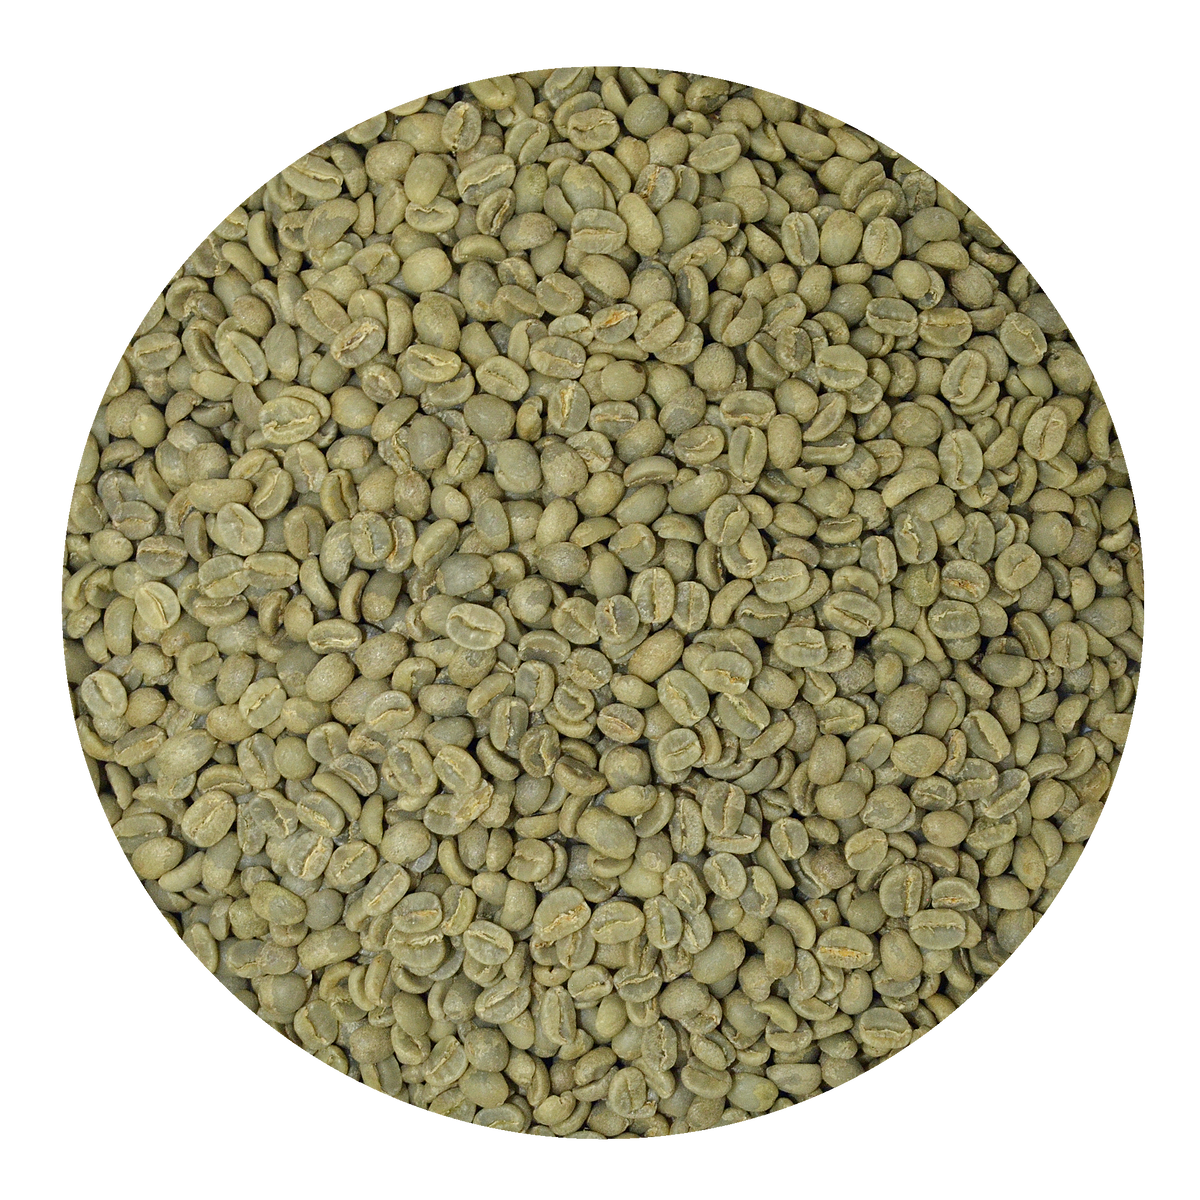 Congo green coffee beans offer a unique flavor experience from East Africa